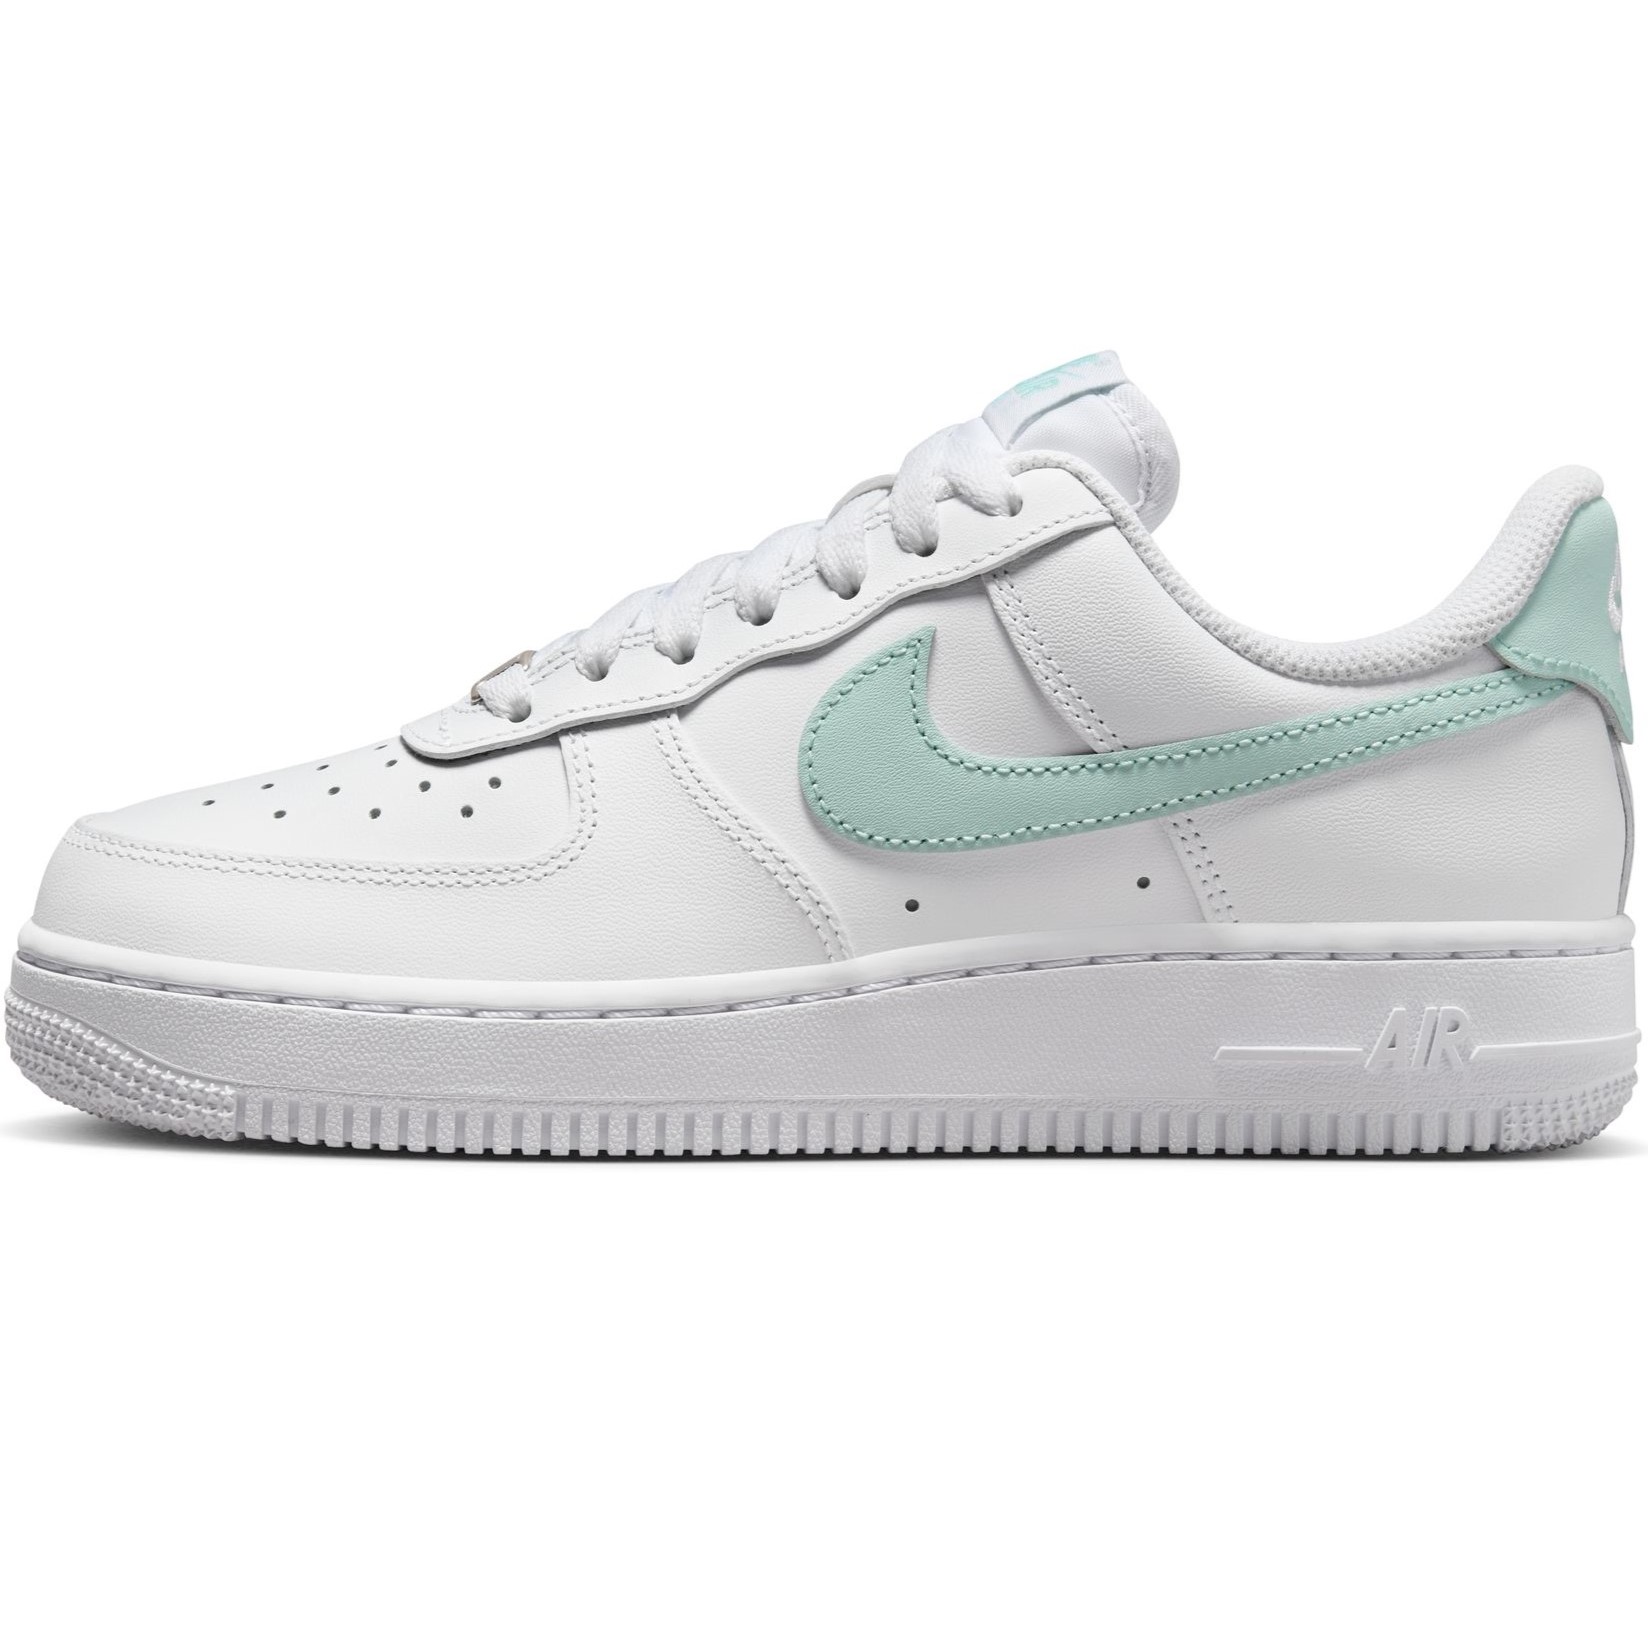 GIÀY NIKE NỮ AIR FORCE 1 07 EASYON WHITE ICE JADE WOMENS SHOES DX5883-101 4